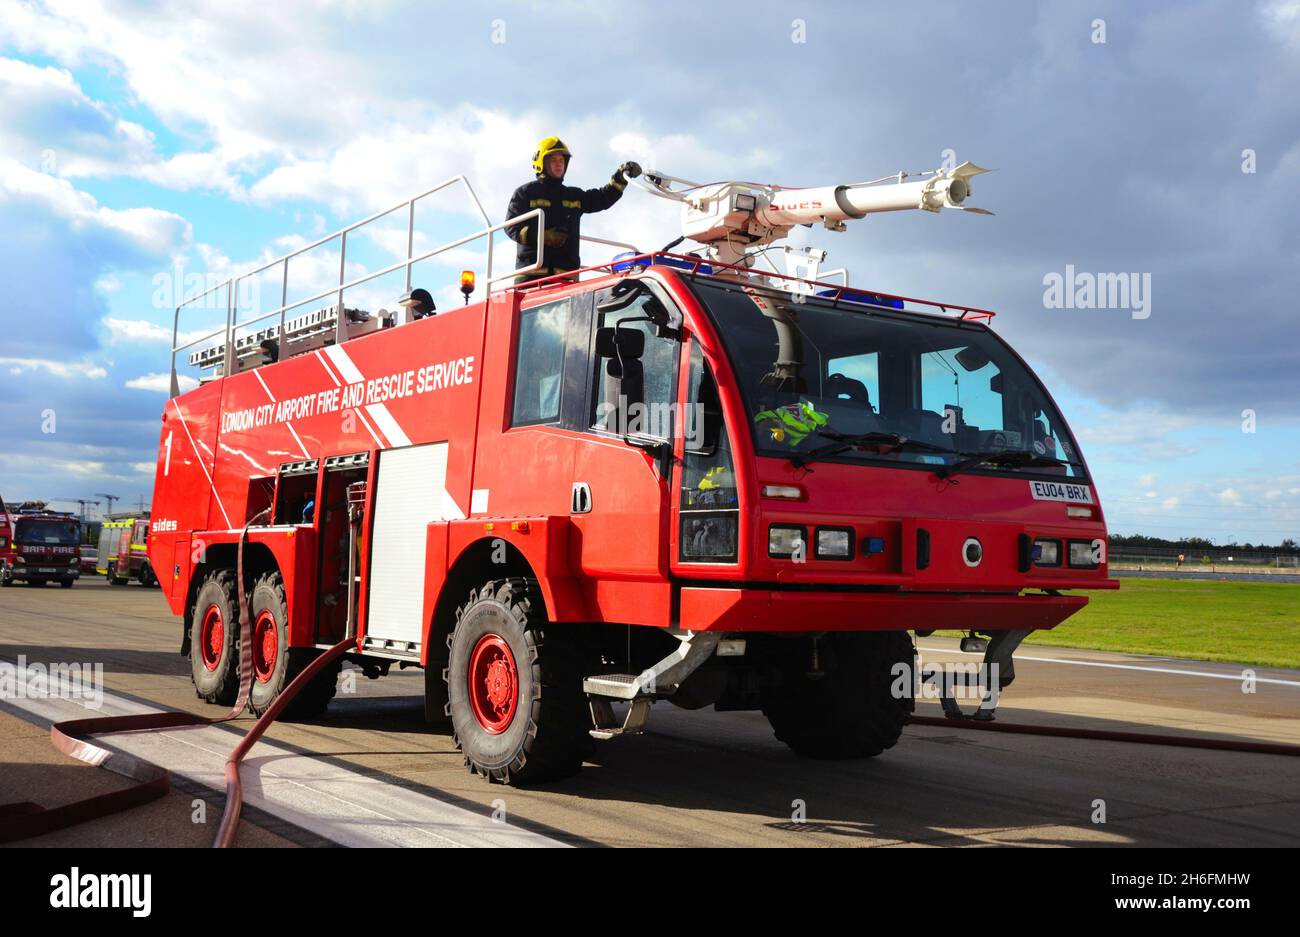 Fire Trucks at London City Airport. London City Airport is an international airport in London, England. It is located in the Royal Docks in the London Stock Photo